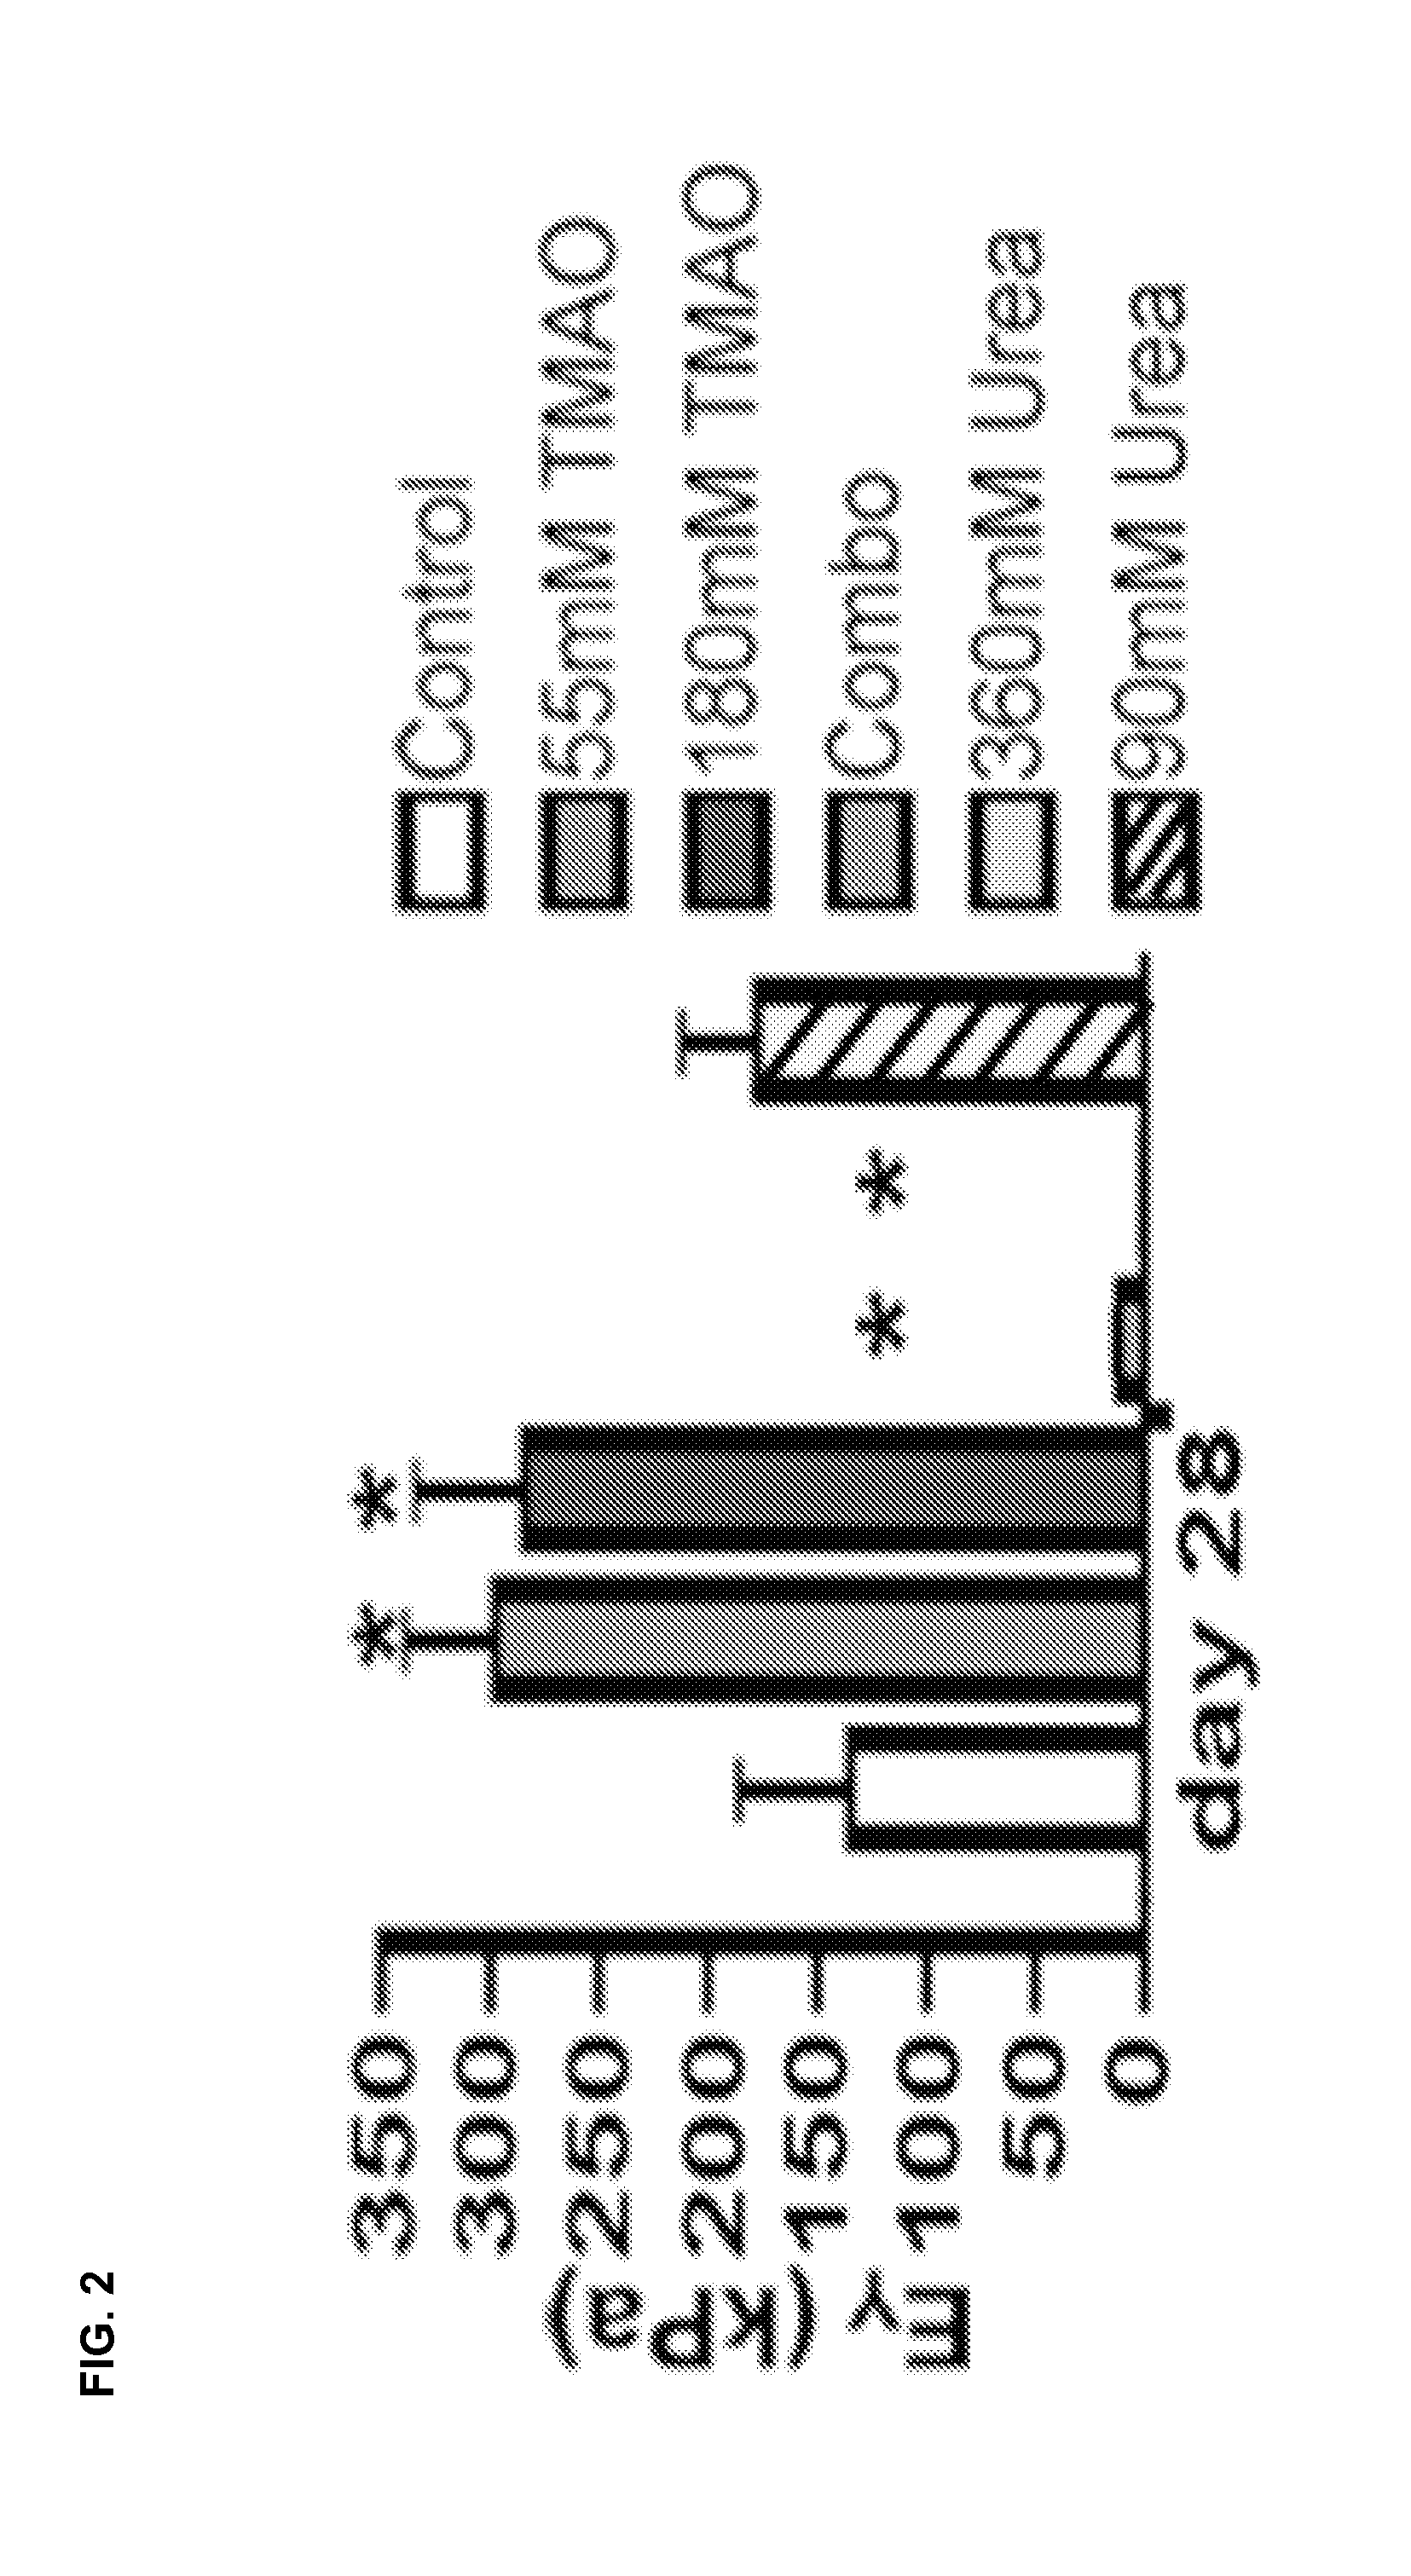 Tissue culture method for producing cartilage using trimethylamine N-oxide and chondroitinase